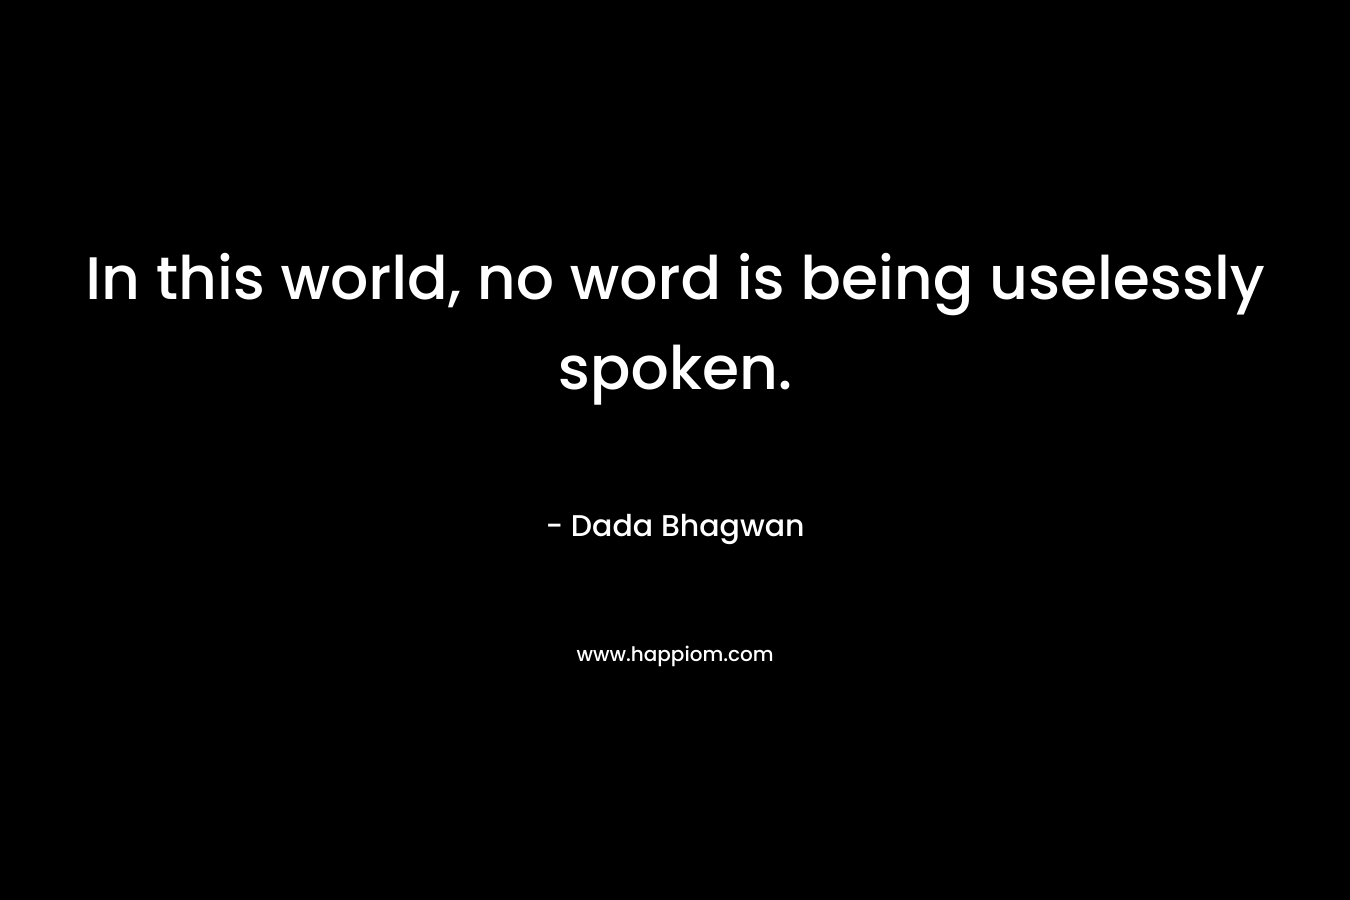 In this world, no word is being uselessly spoken.